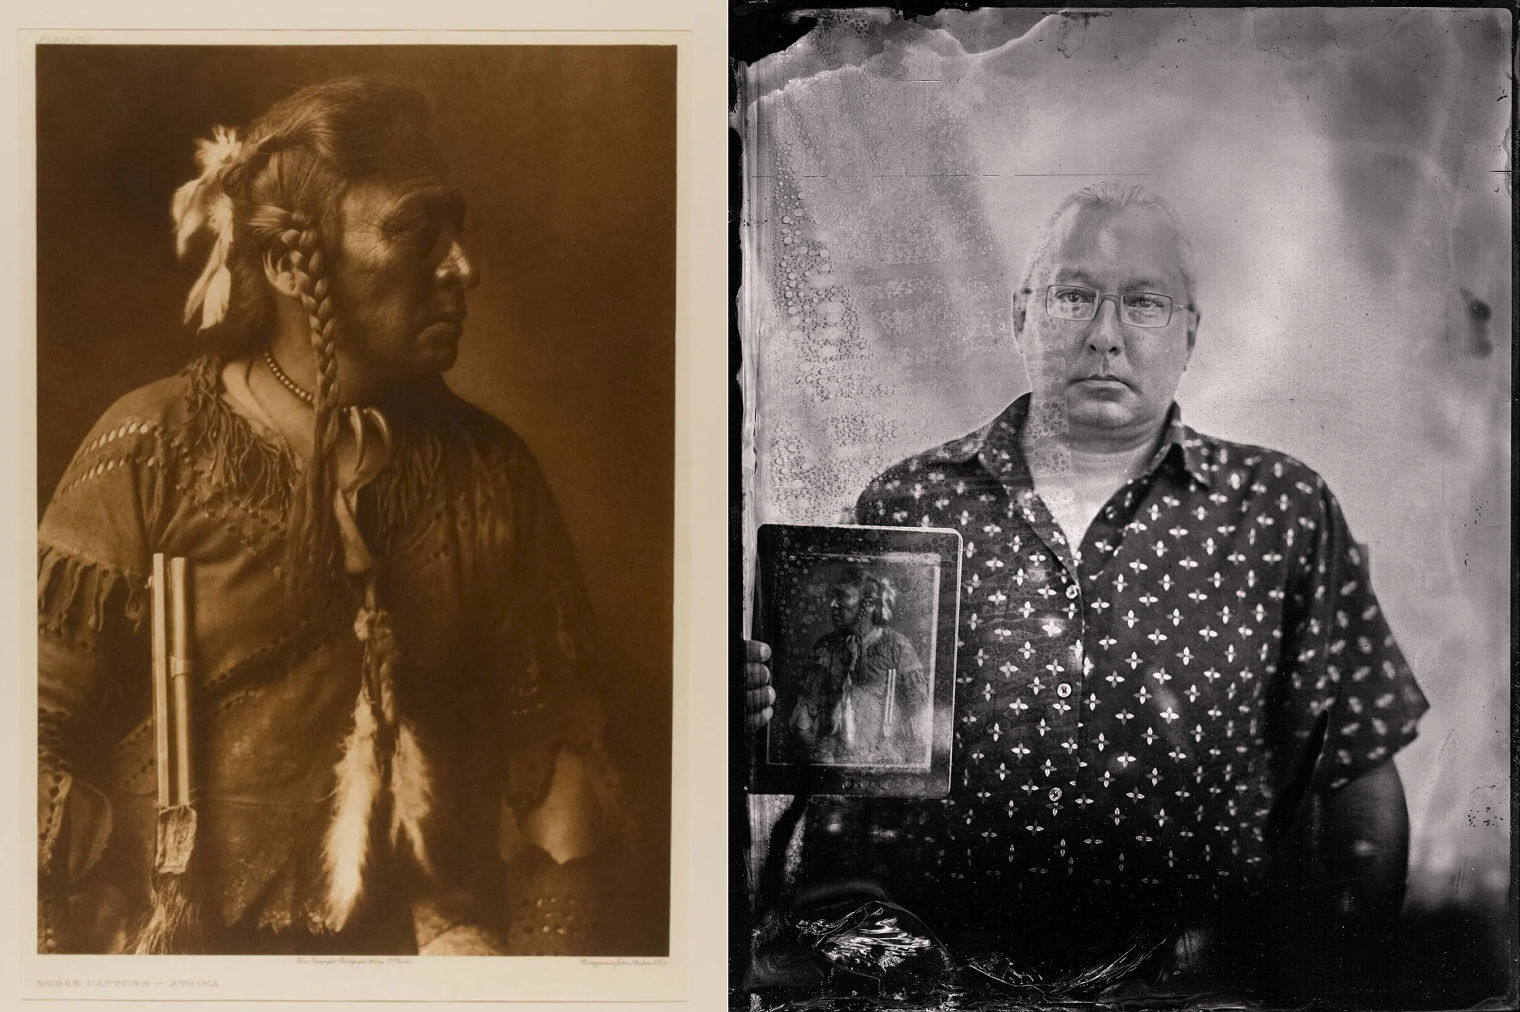 Portraits of two men, the first one wears traditional Native American clothing and has braided hair, the second one is wearing a button-down shirt and is holding a photograph of the first man